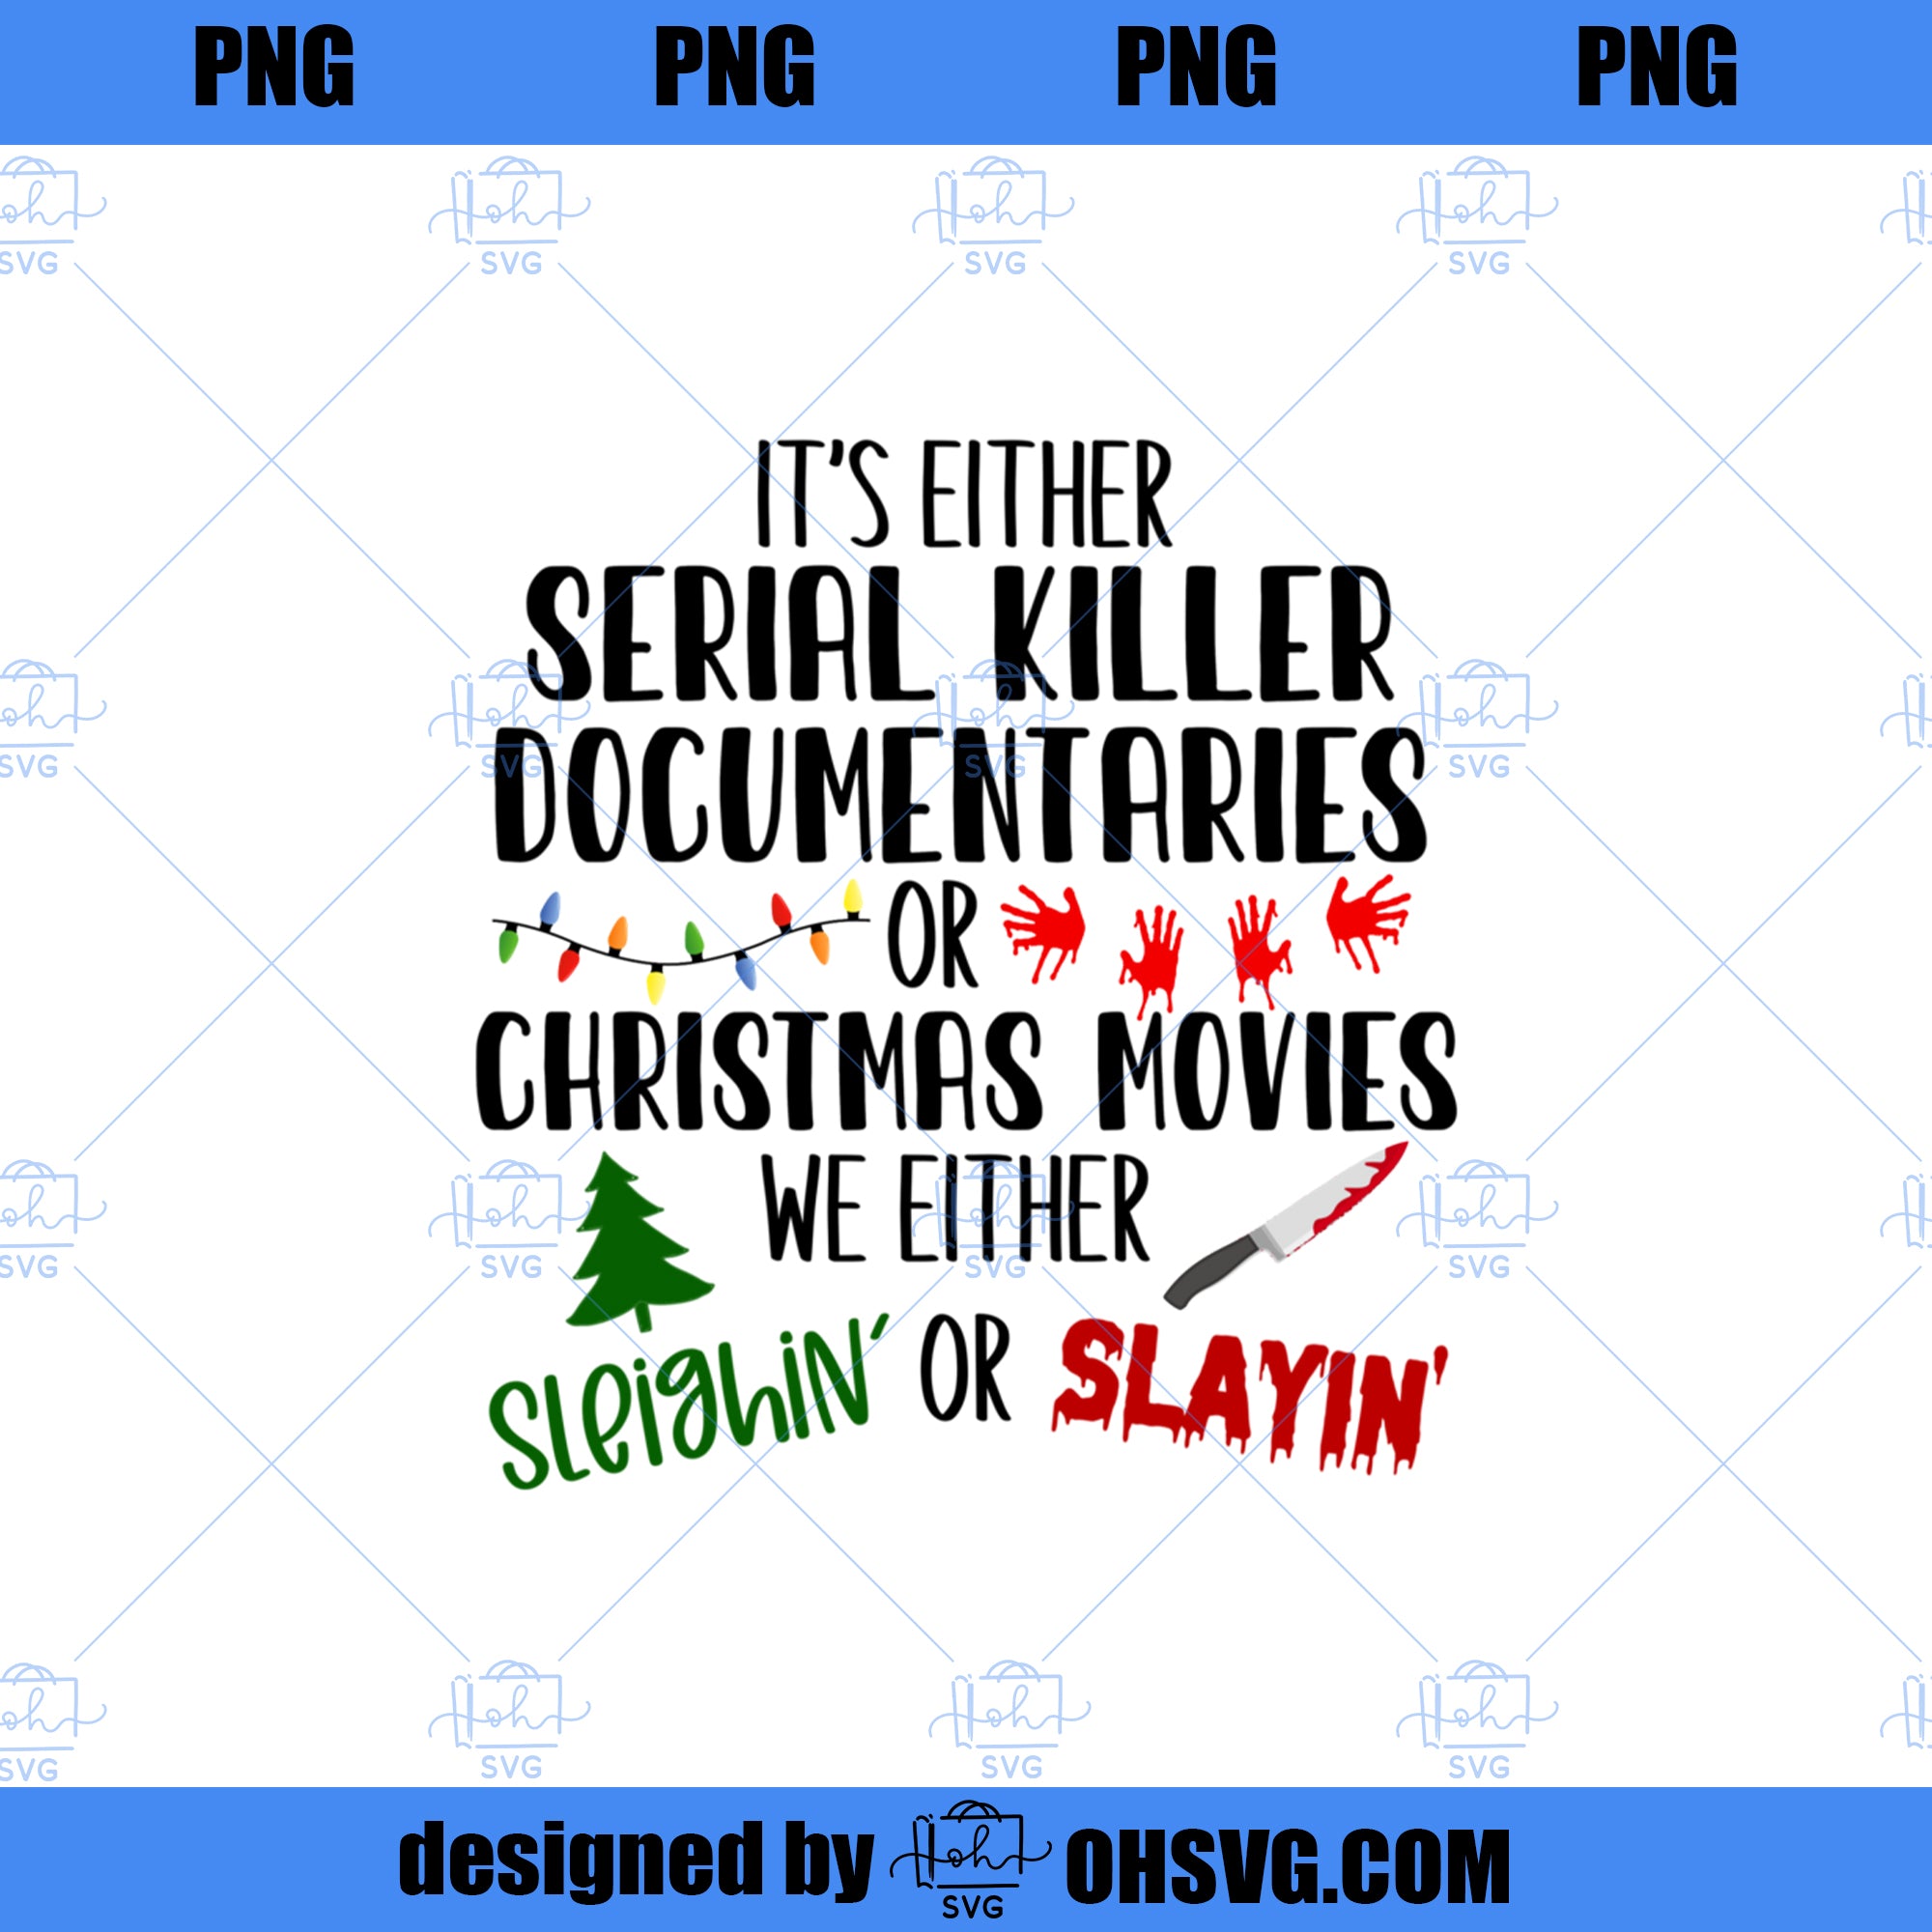 Its either serial killer documentaries or Christmas movies  PNG, Movies PNG, Christmas movies  PNG